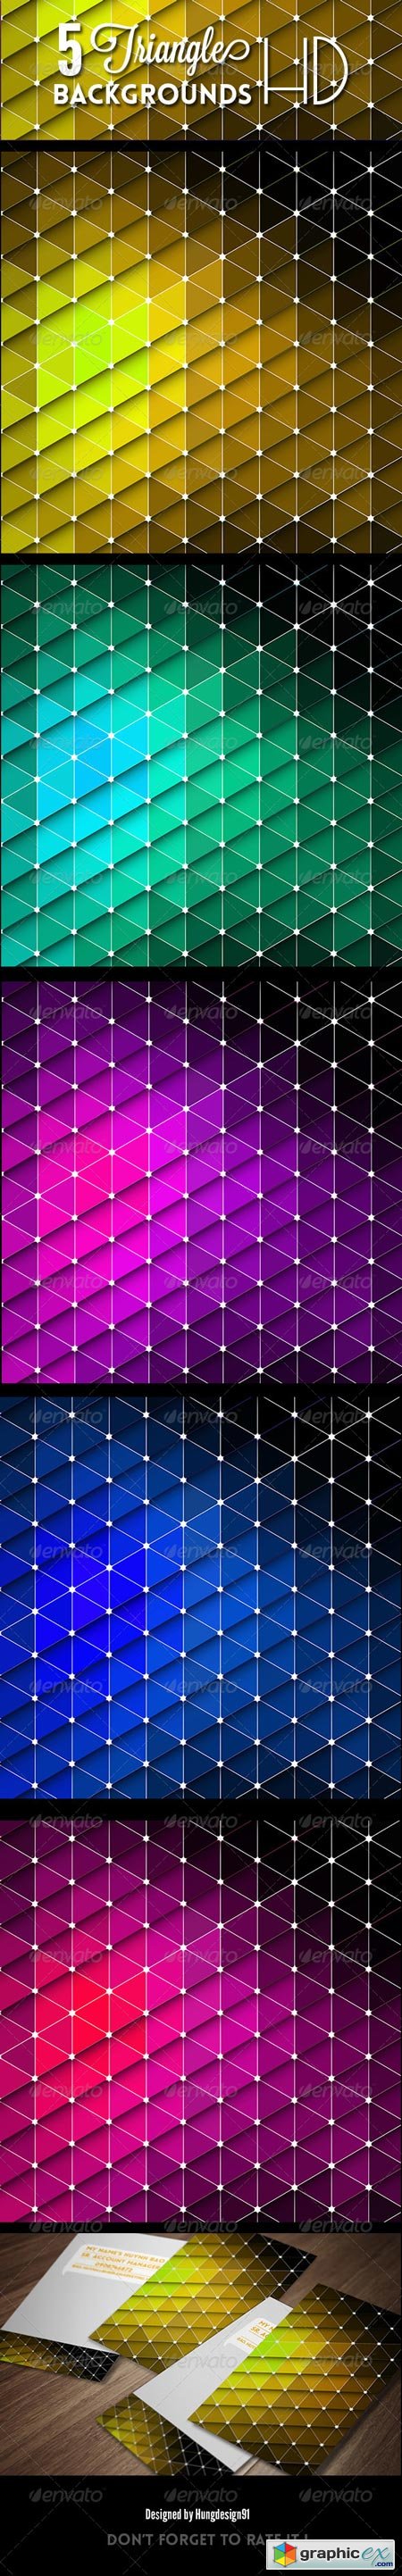 5 Triangle Backgrounds HD 7111259